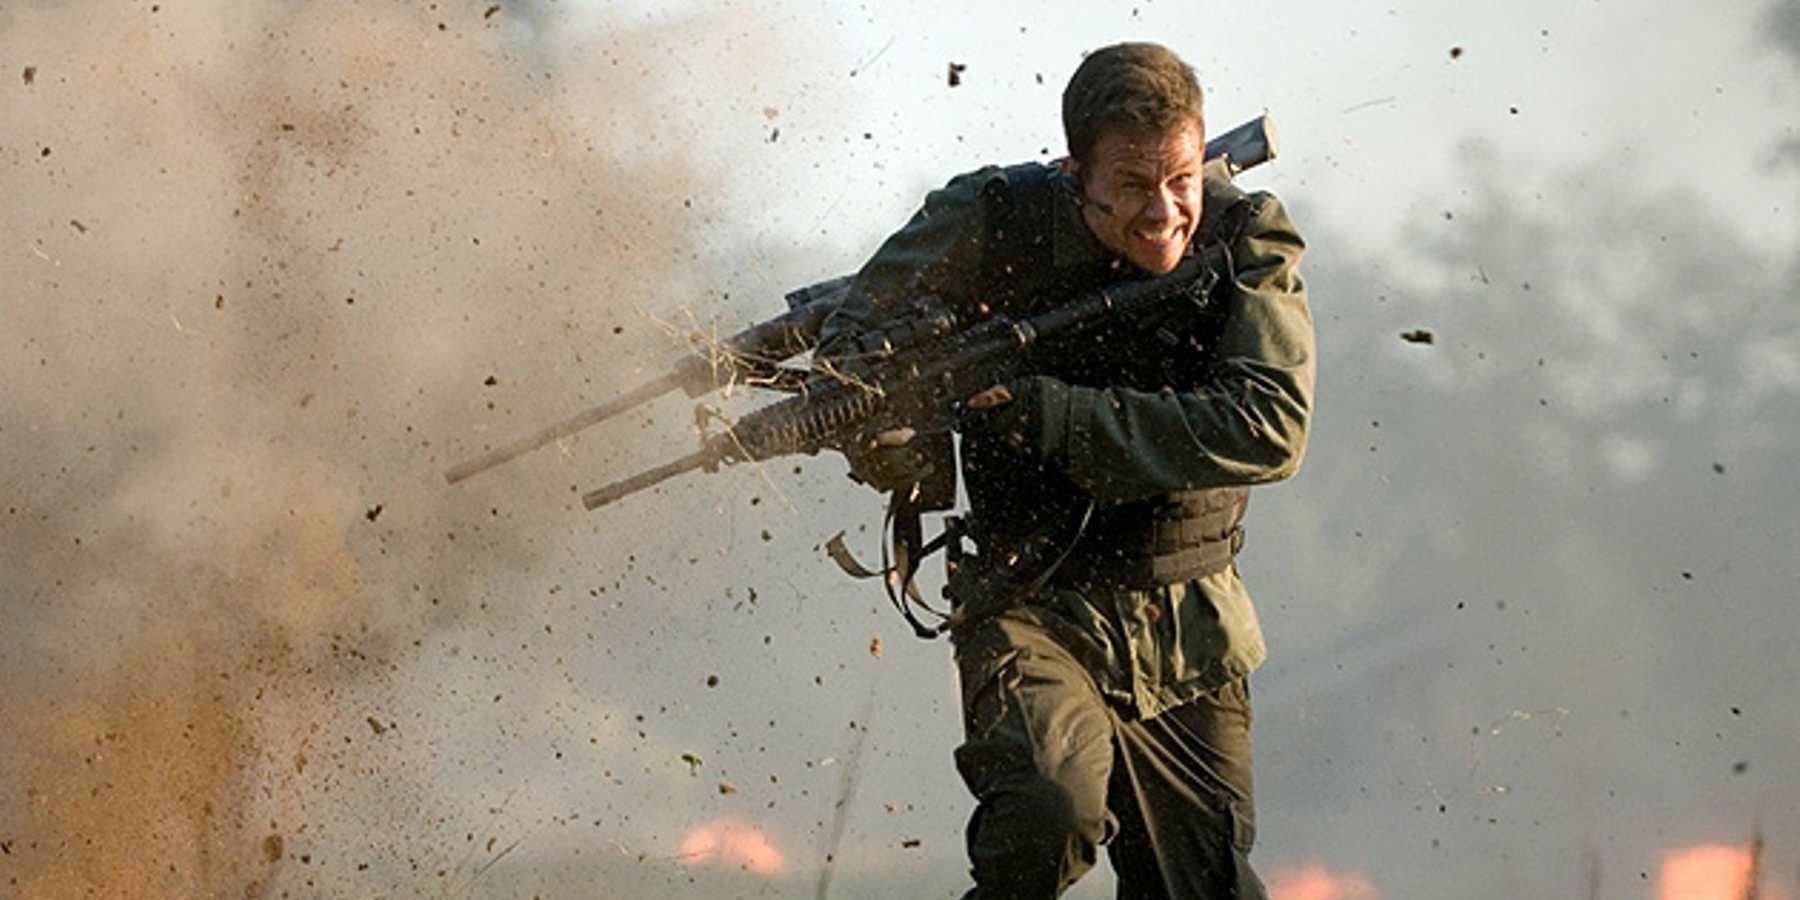 Mark Wahlberg in Shooter